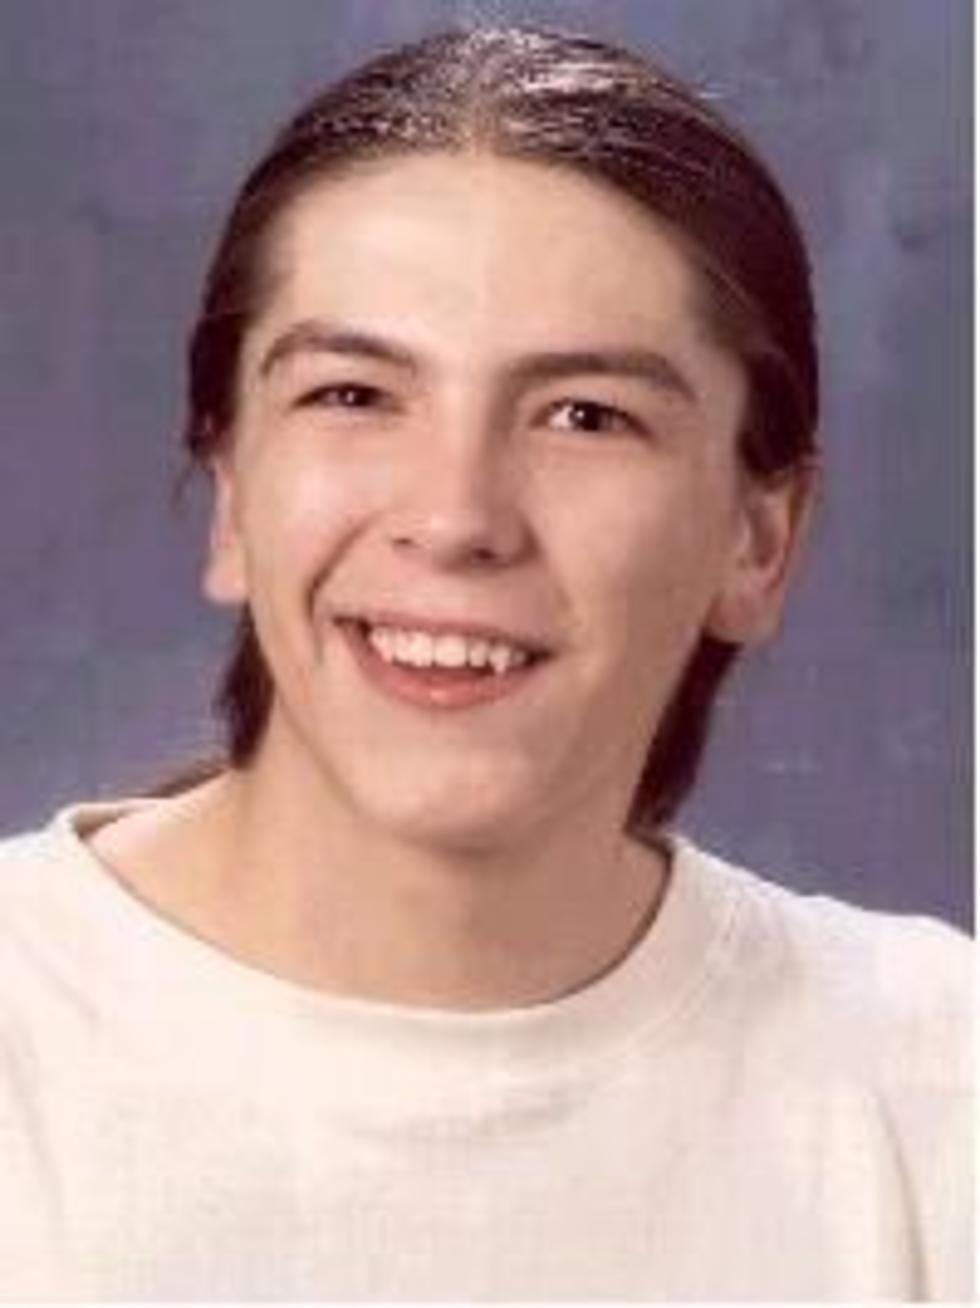 A Montanan Murdered In 2002. What Happened to Russell Turcotte?